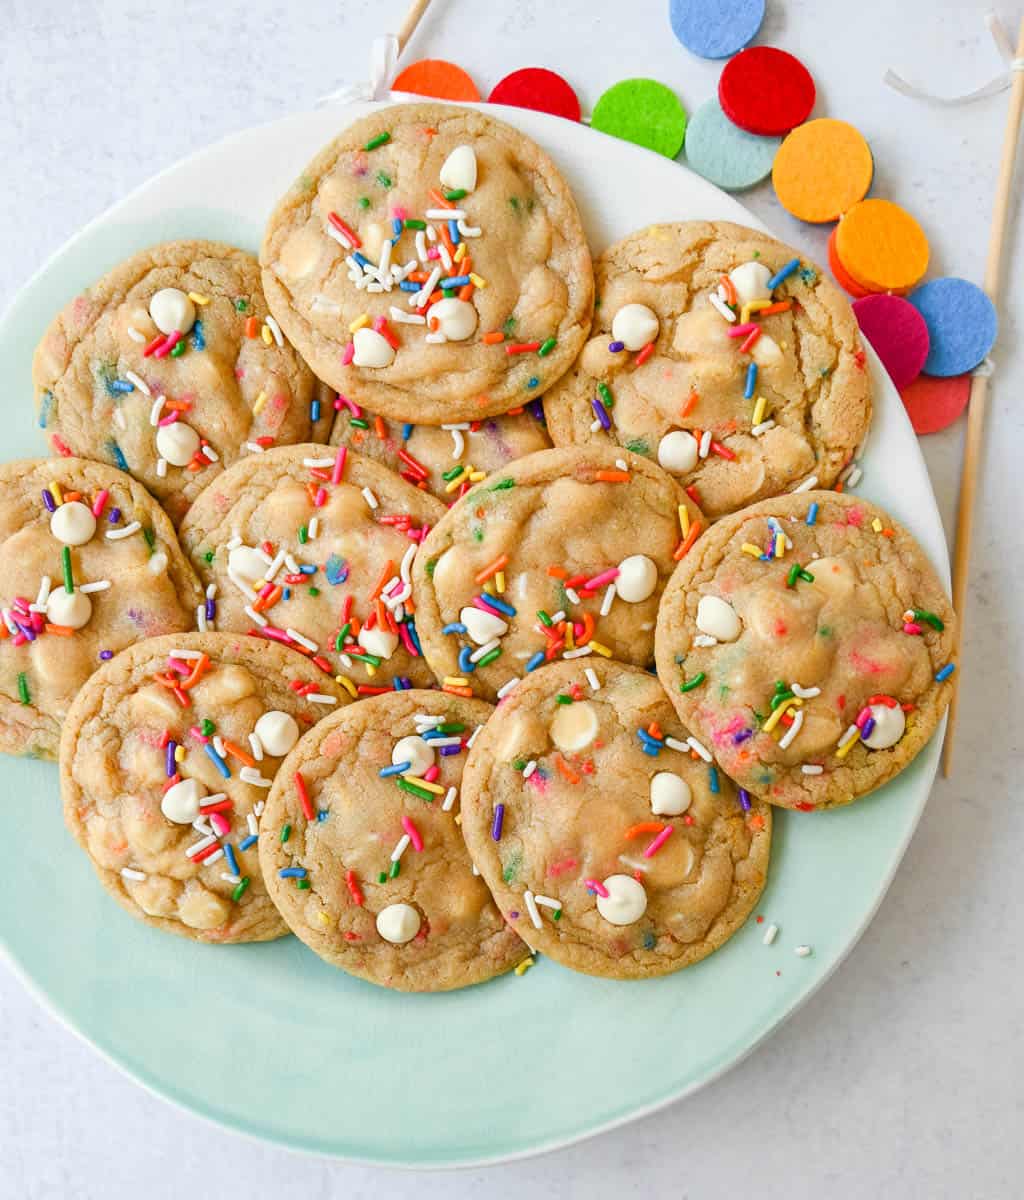 Soft, chewy sugar cookies filled with sprinkles and white chocolate. This festive funfetti cookie recipe has the perfect chewy center with buttery crisp edges filled with rainbow sprinkles. 